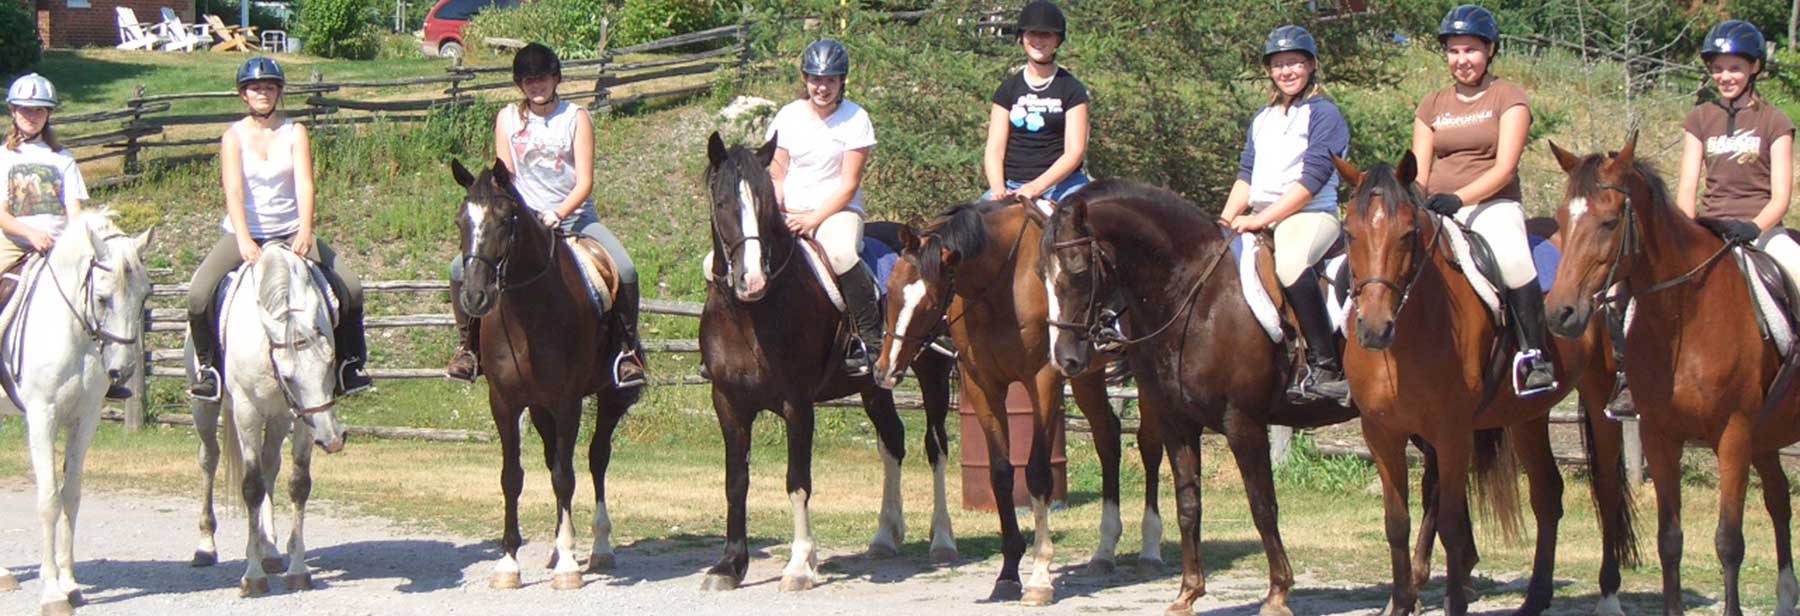 Stillbrook Riding Stables offers year round trail rides